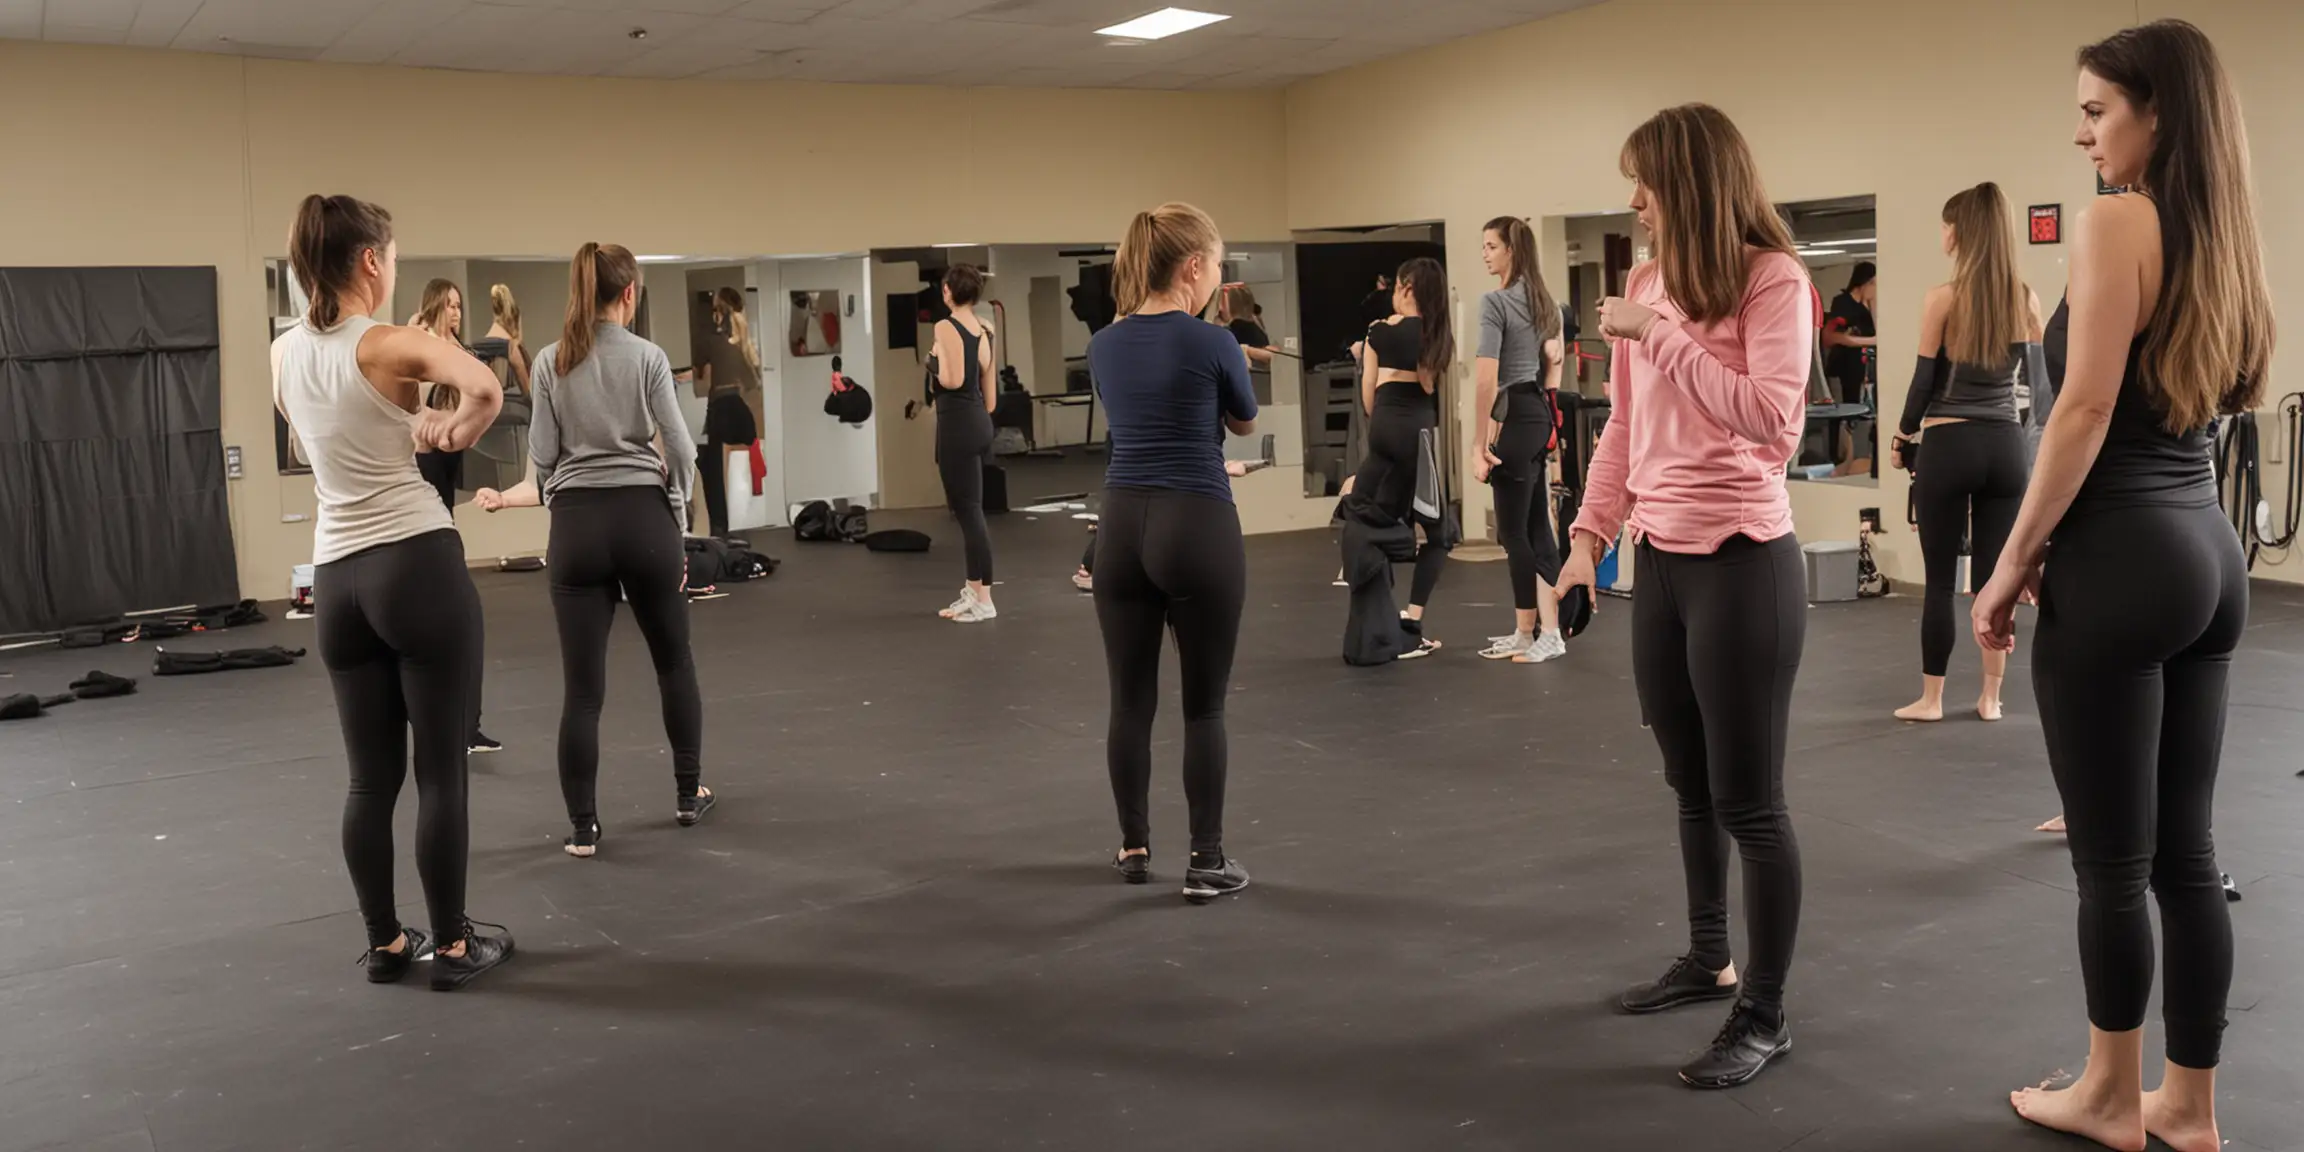 women getting ready for self-defense class